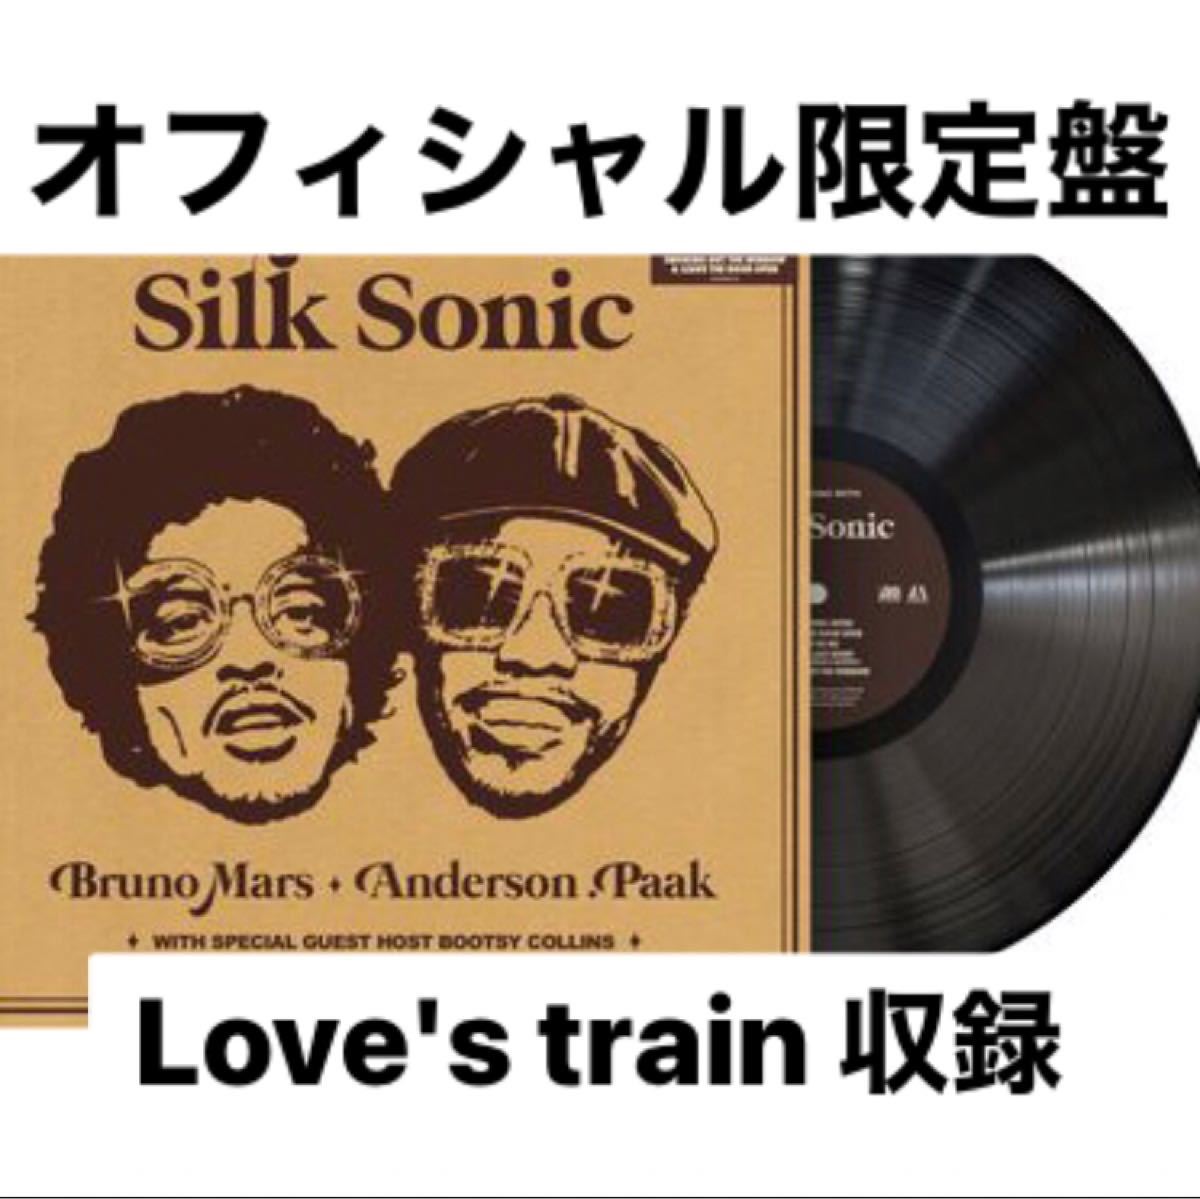 An Evening With Silk Sonic ブルーノマーズ アンダーソンパーク Bruno 